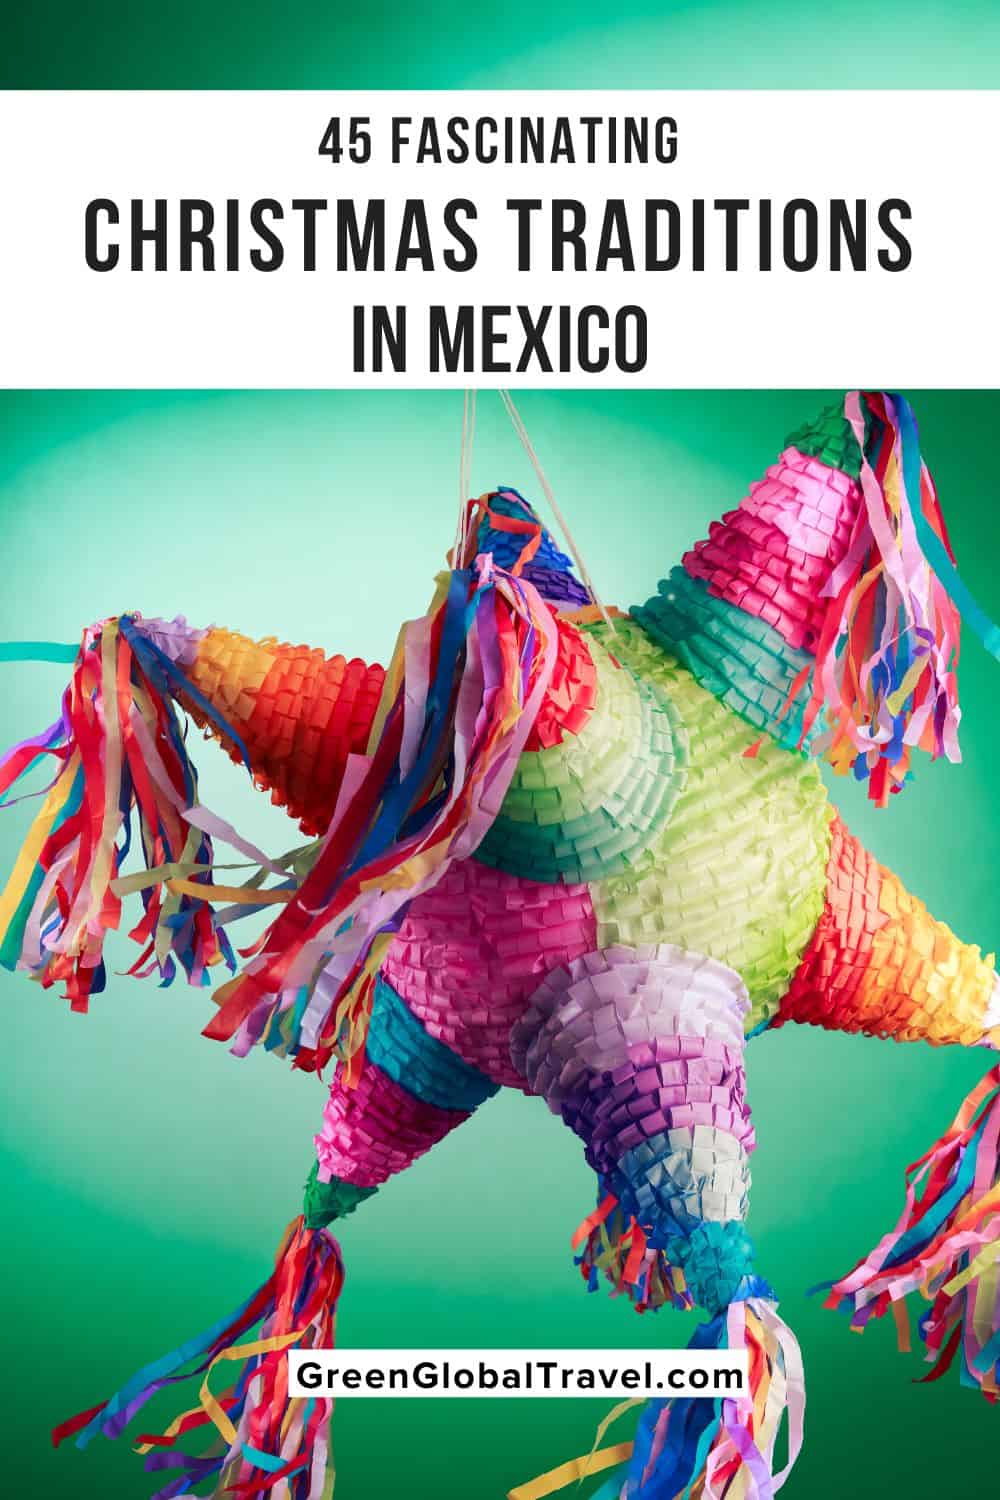 45 Fascinating Christmas Traditions in Mexico including Christmas Food in Mexico, Mexican Christmas Decorations, Mexican Christmas Trees, Santa in Mexico, and Christmas Songs in Mexico | mexican christmas | christmas mexico | mexico at christmas | mexican christmas traditions | mexico christmas traditions | traditions in mexico for christmas | mexico traditions christmas | christmas mexican traditions | traditional mexican christmas | mexico christmas decorations | mexican christmas trees